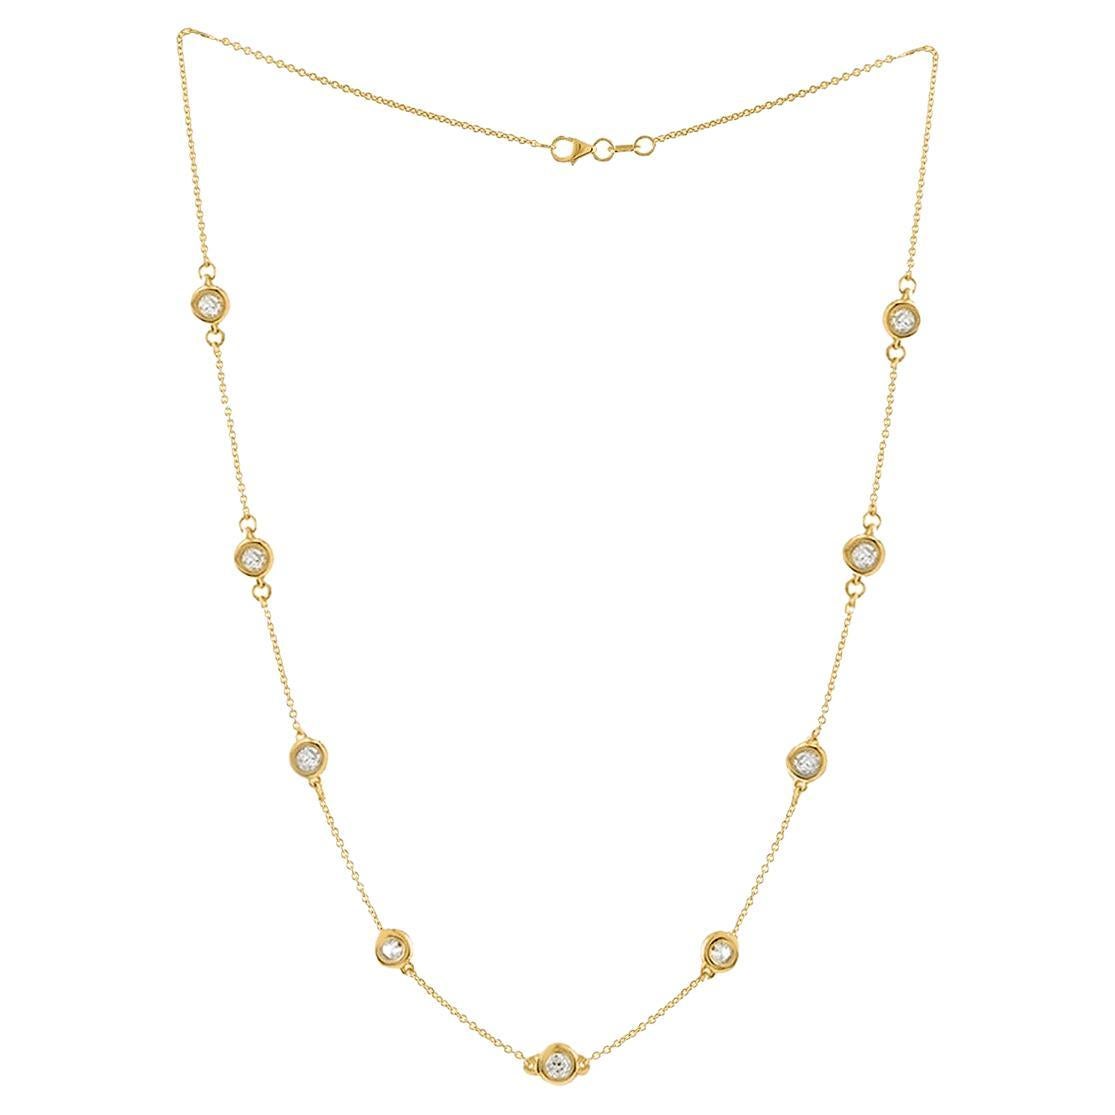 Diana M. 14kt yellow gold, 18" diamonds-by-the-yard necklace featuring 2.25 cts  For Sale